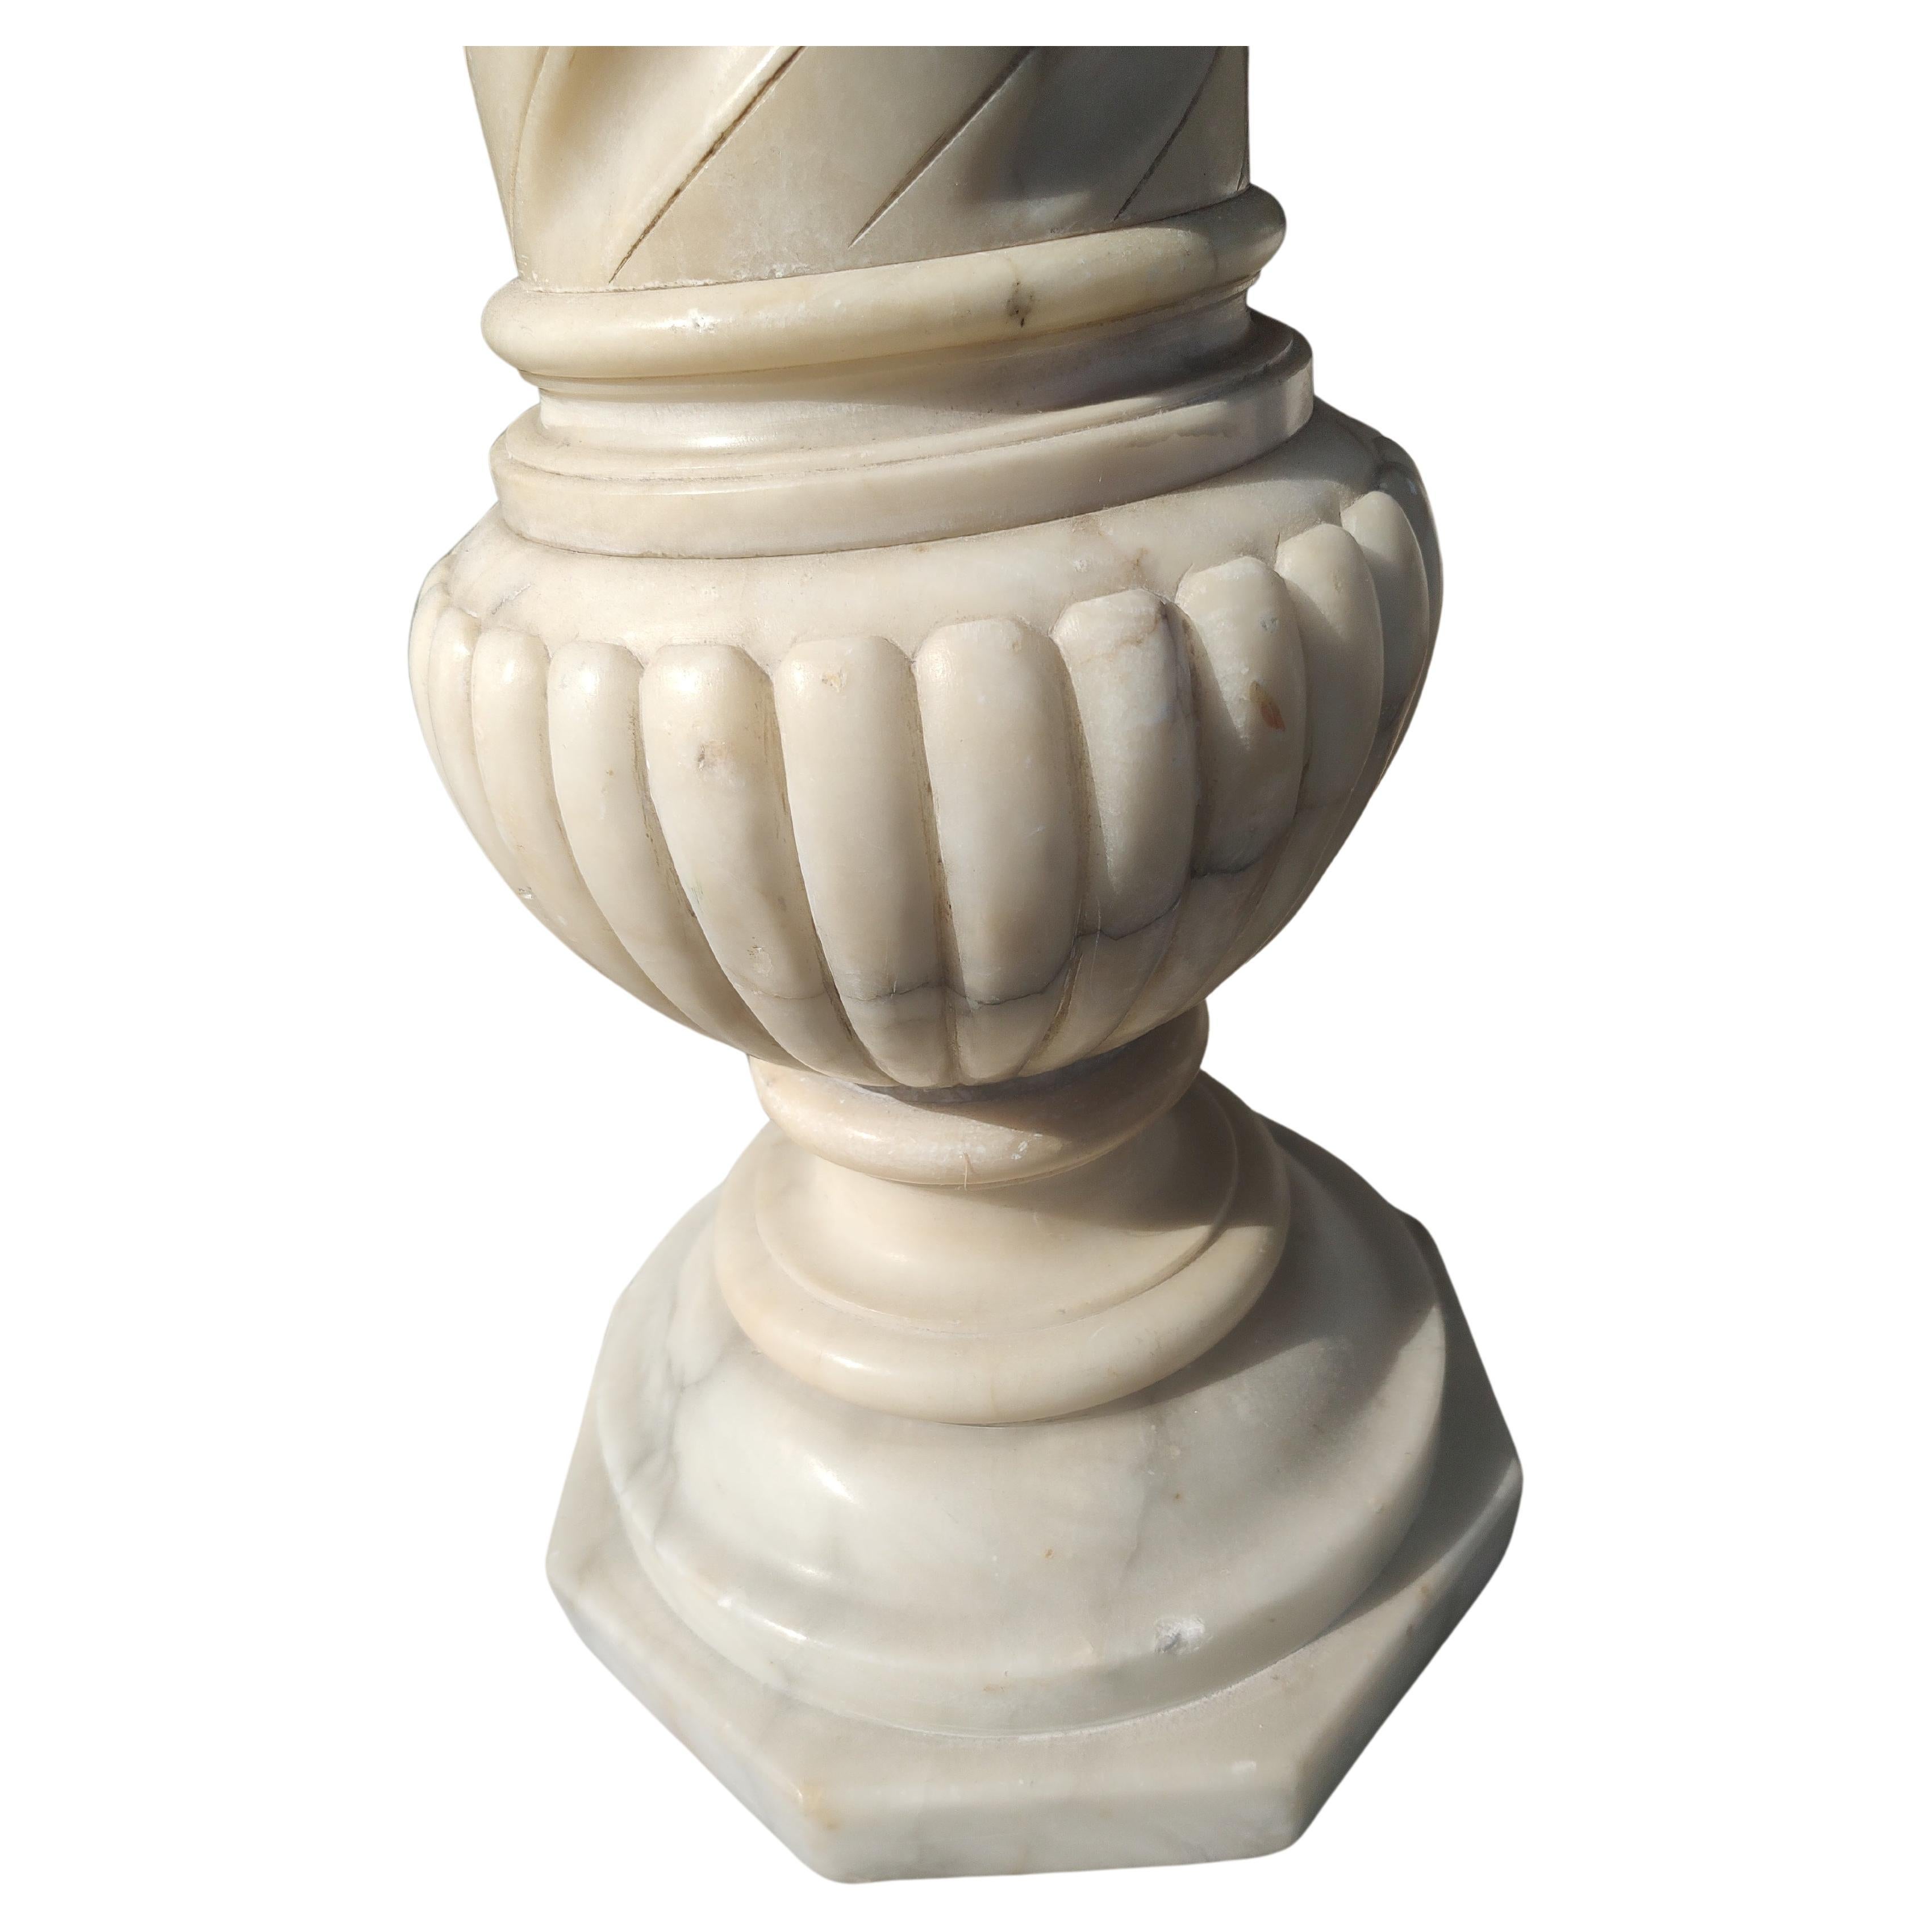 Early Italian Carved Carrara Marble Pedestal C1920 In Good Condition For Sale In Port Jervis, NY